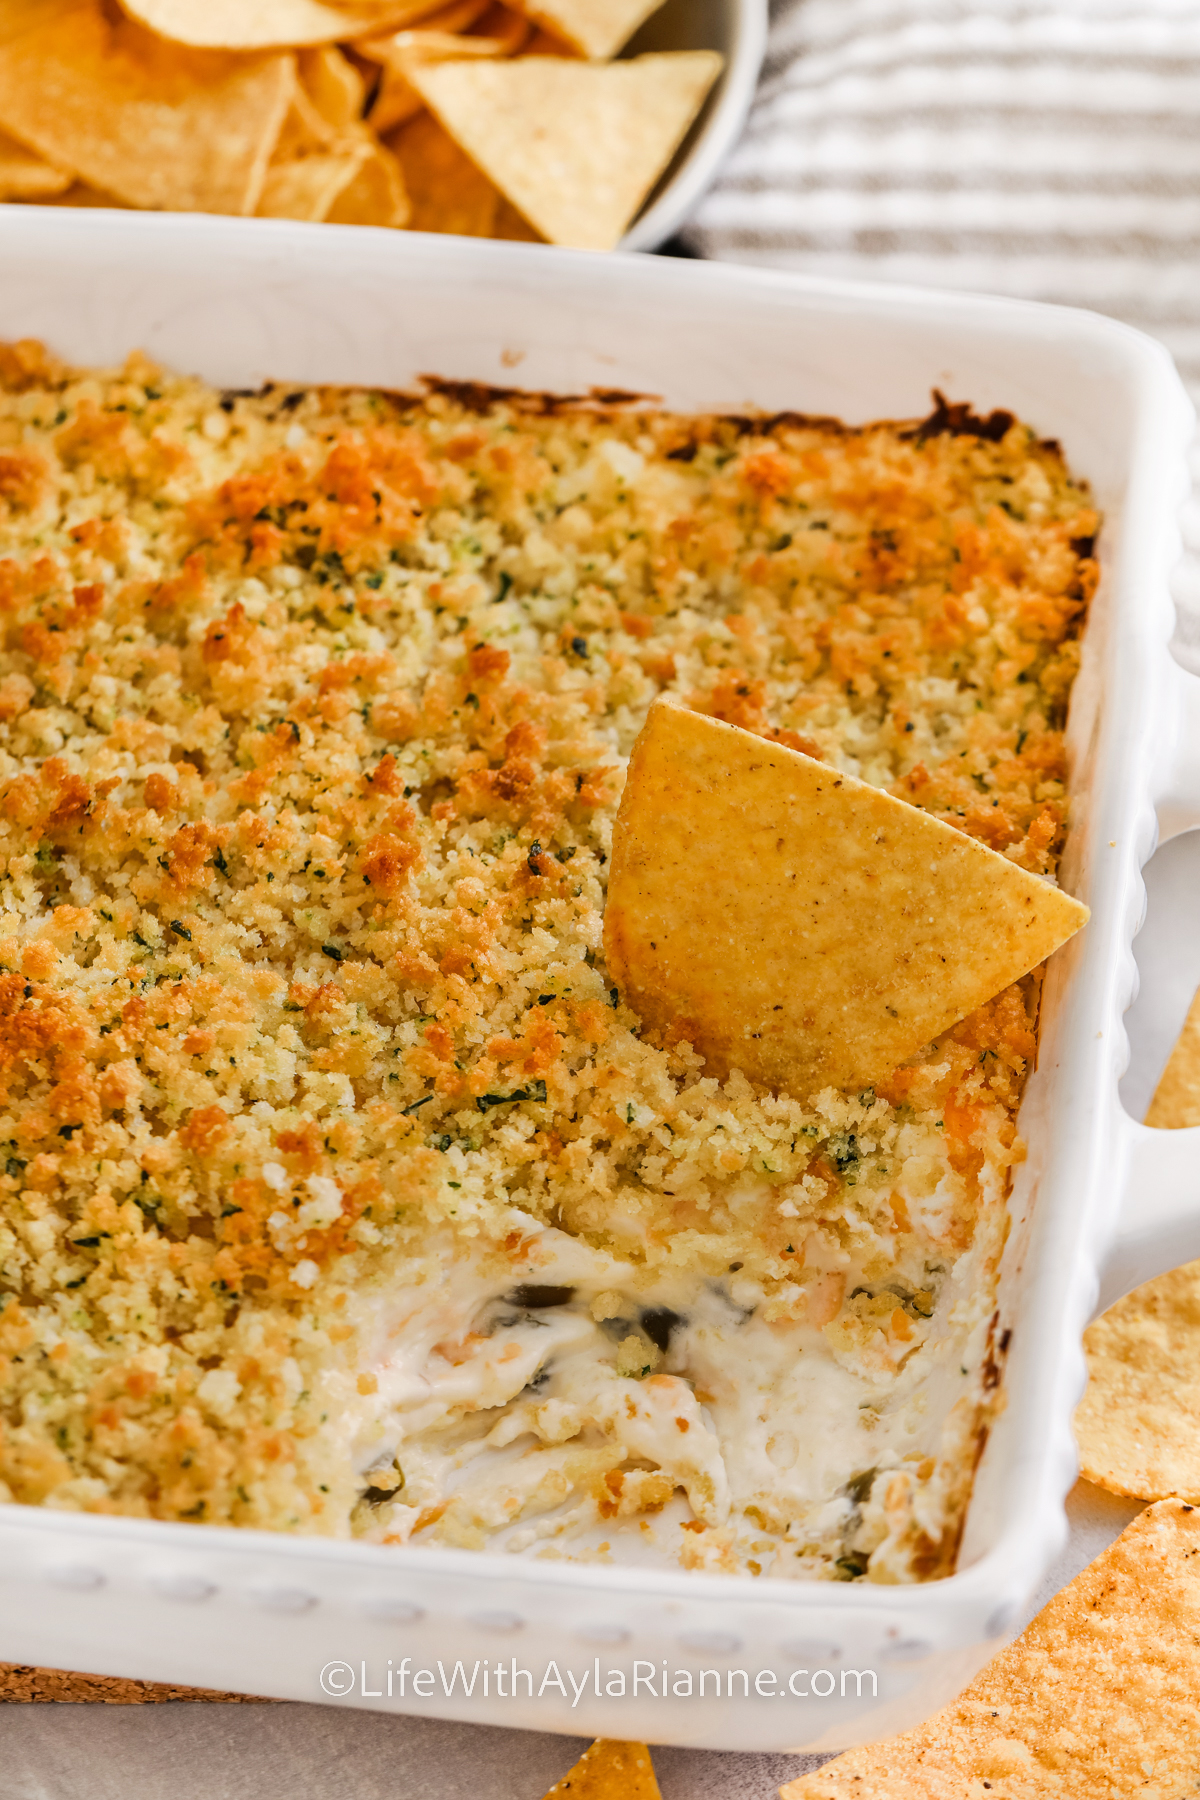 Jalapeno Popper Dip and a tortilla chip